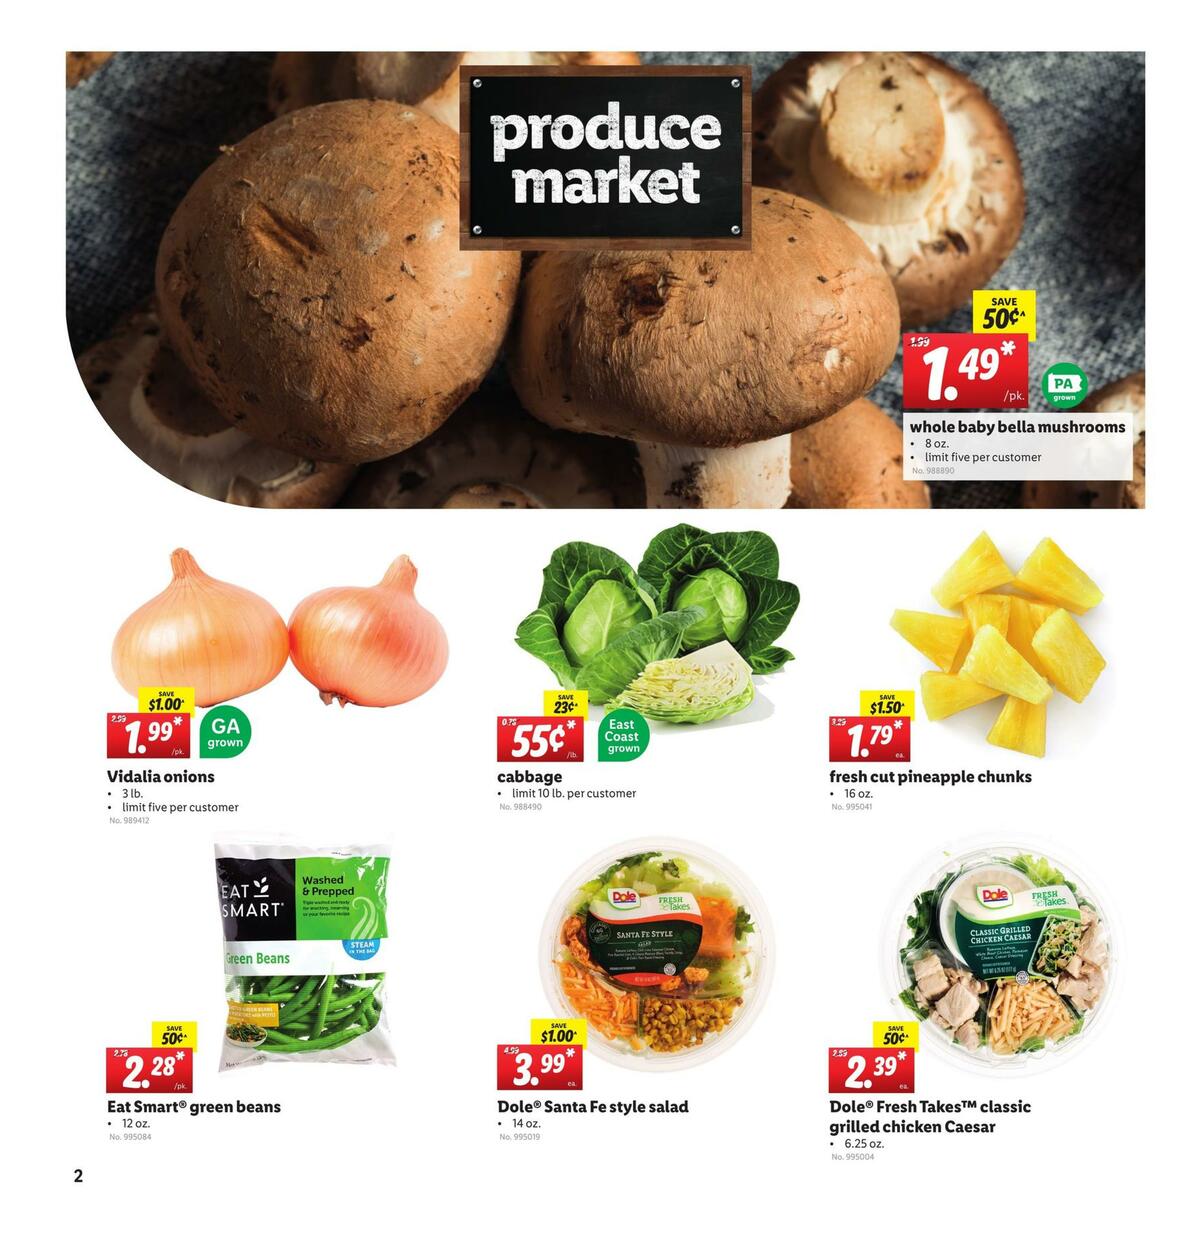 LIDL Weekly Ad from May 19